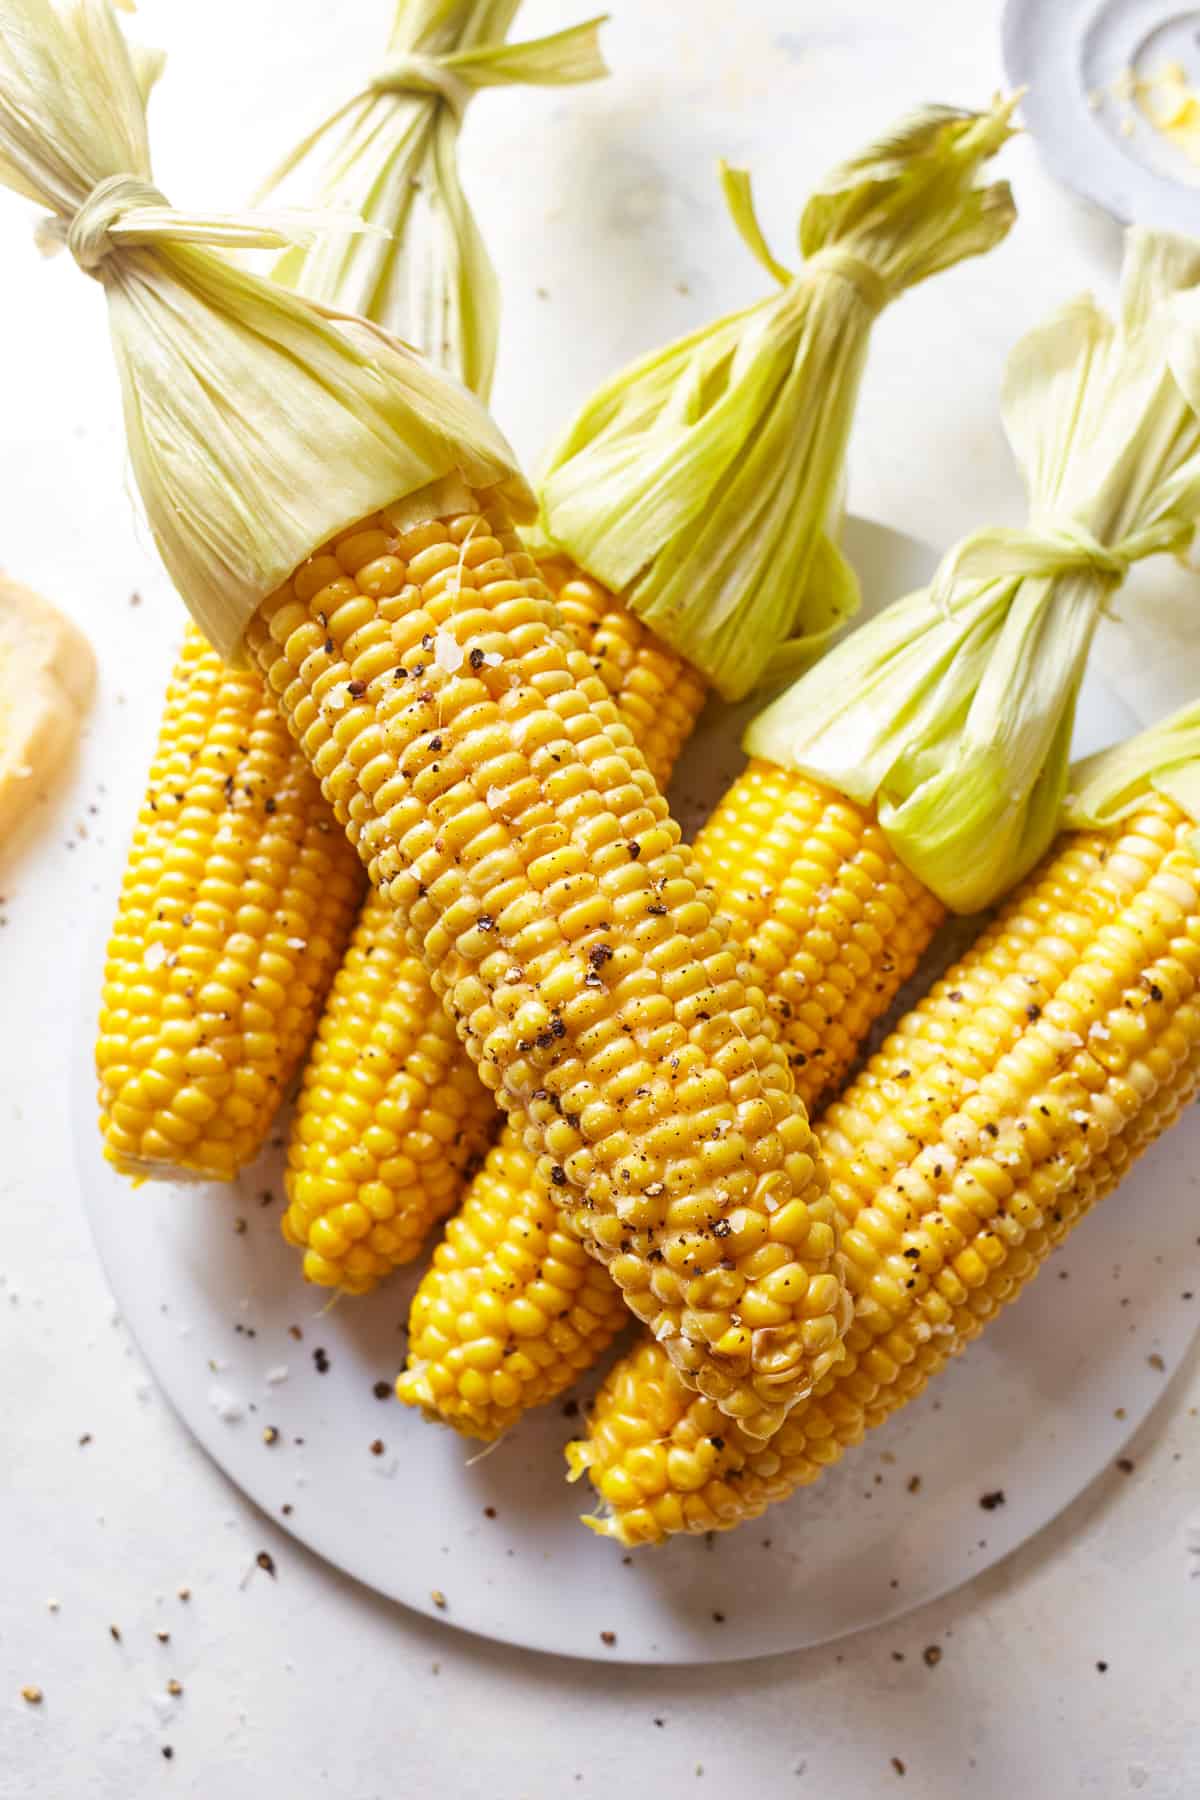 5 ears of corn on the cob with their husks tied back on a glass plate.